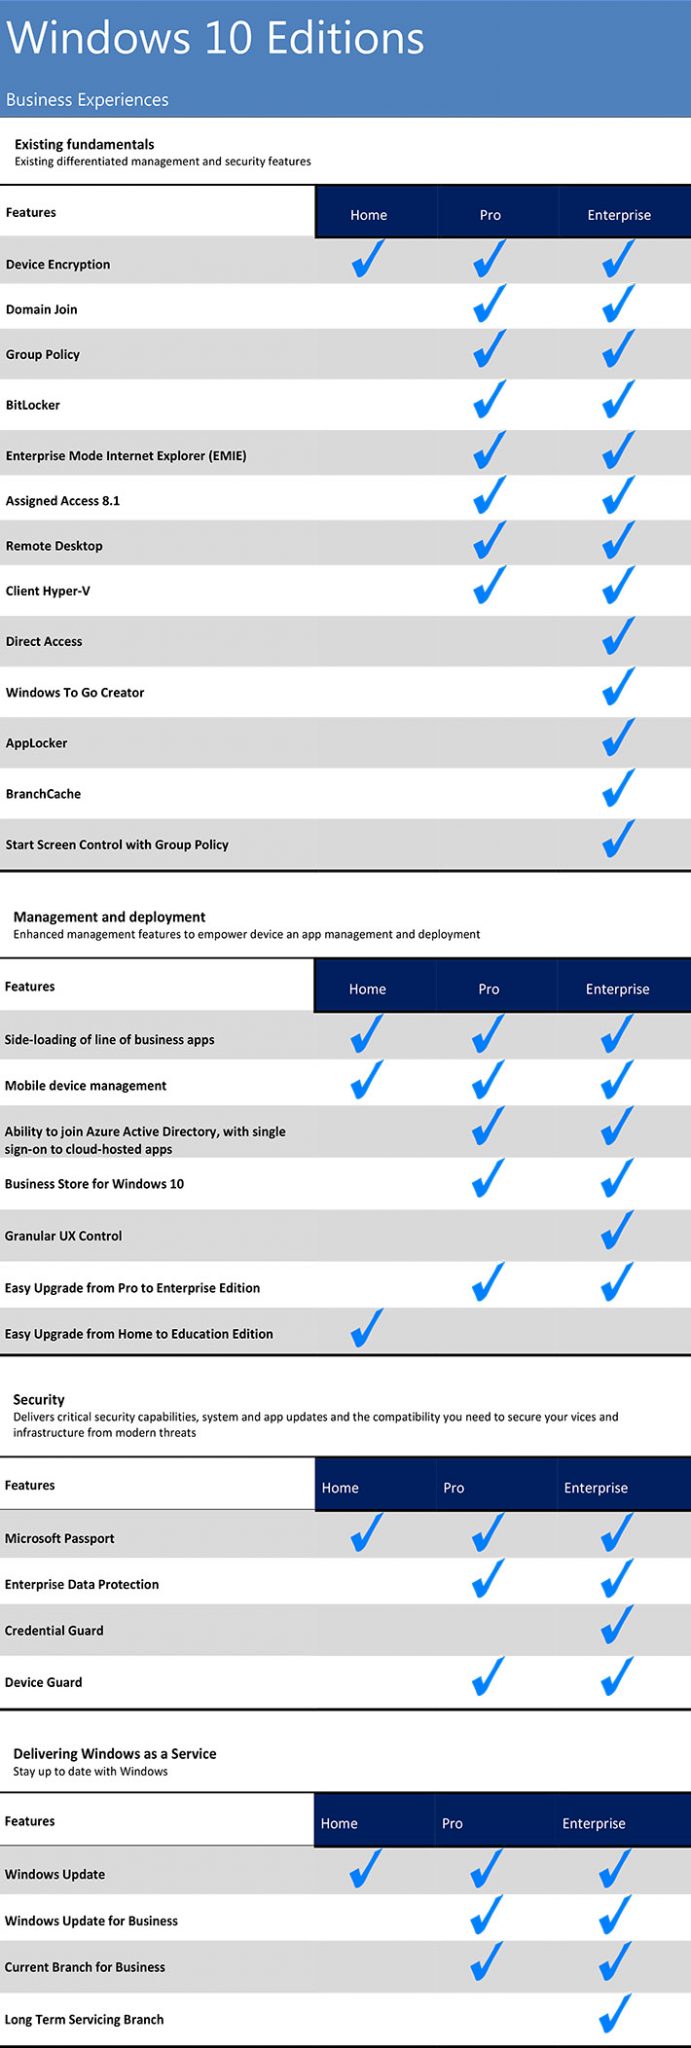 Microsoft Windows 10: What Versions & Features Are in Each Edition